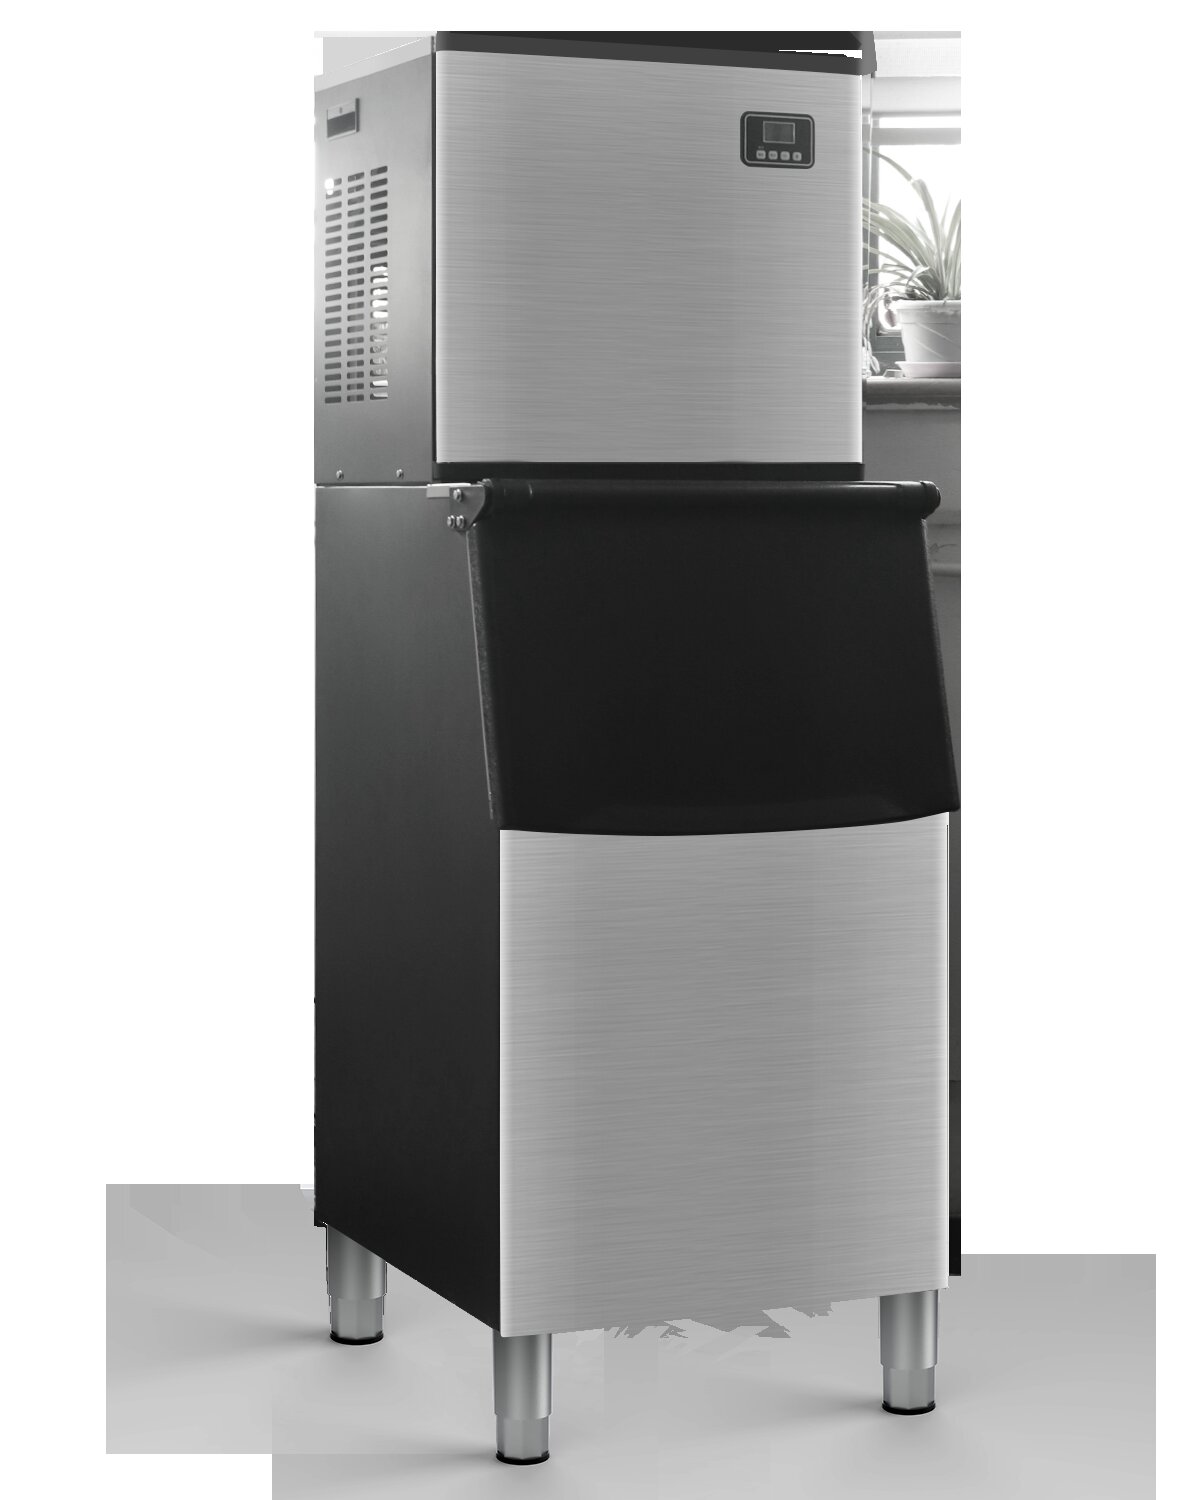 Cooler Depot 350 lbs. Freestanding Commercial Ice Maker in